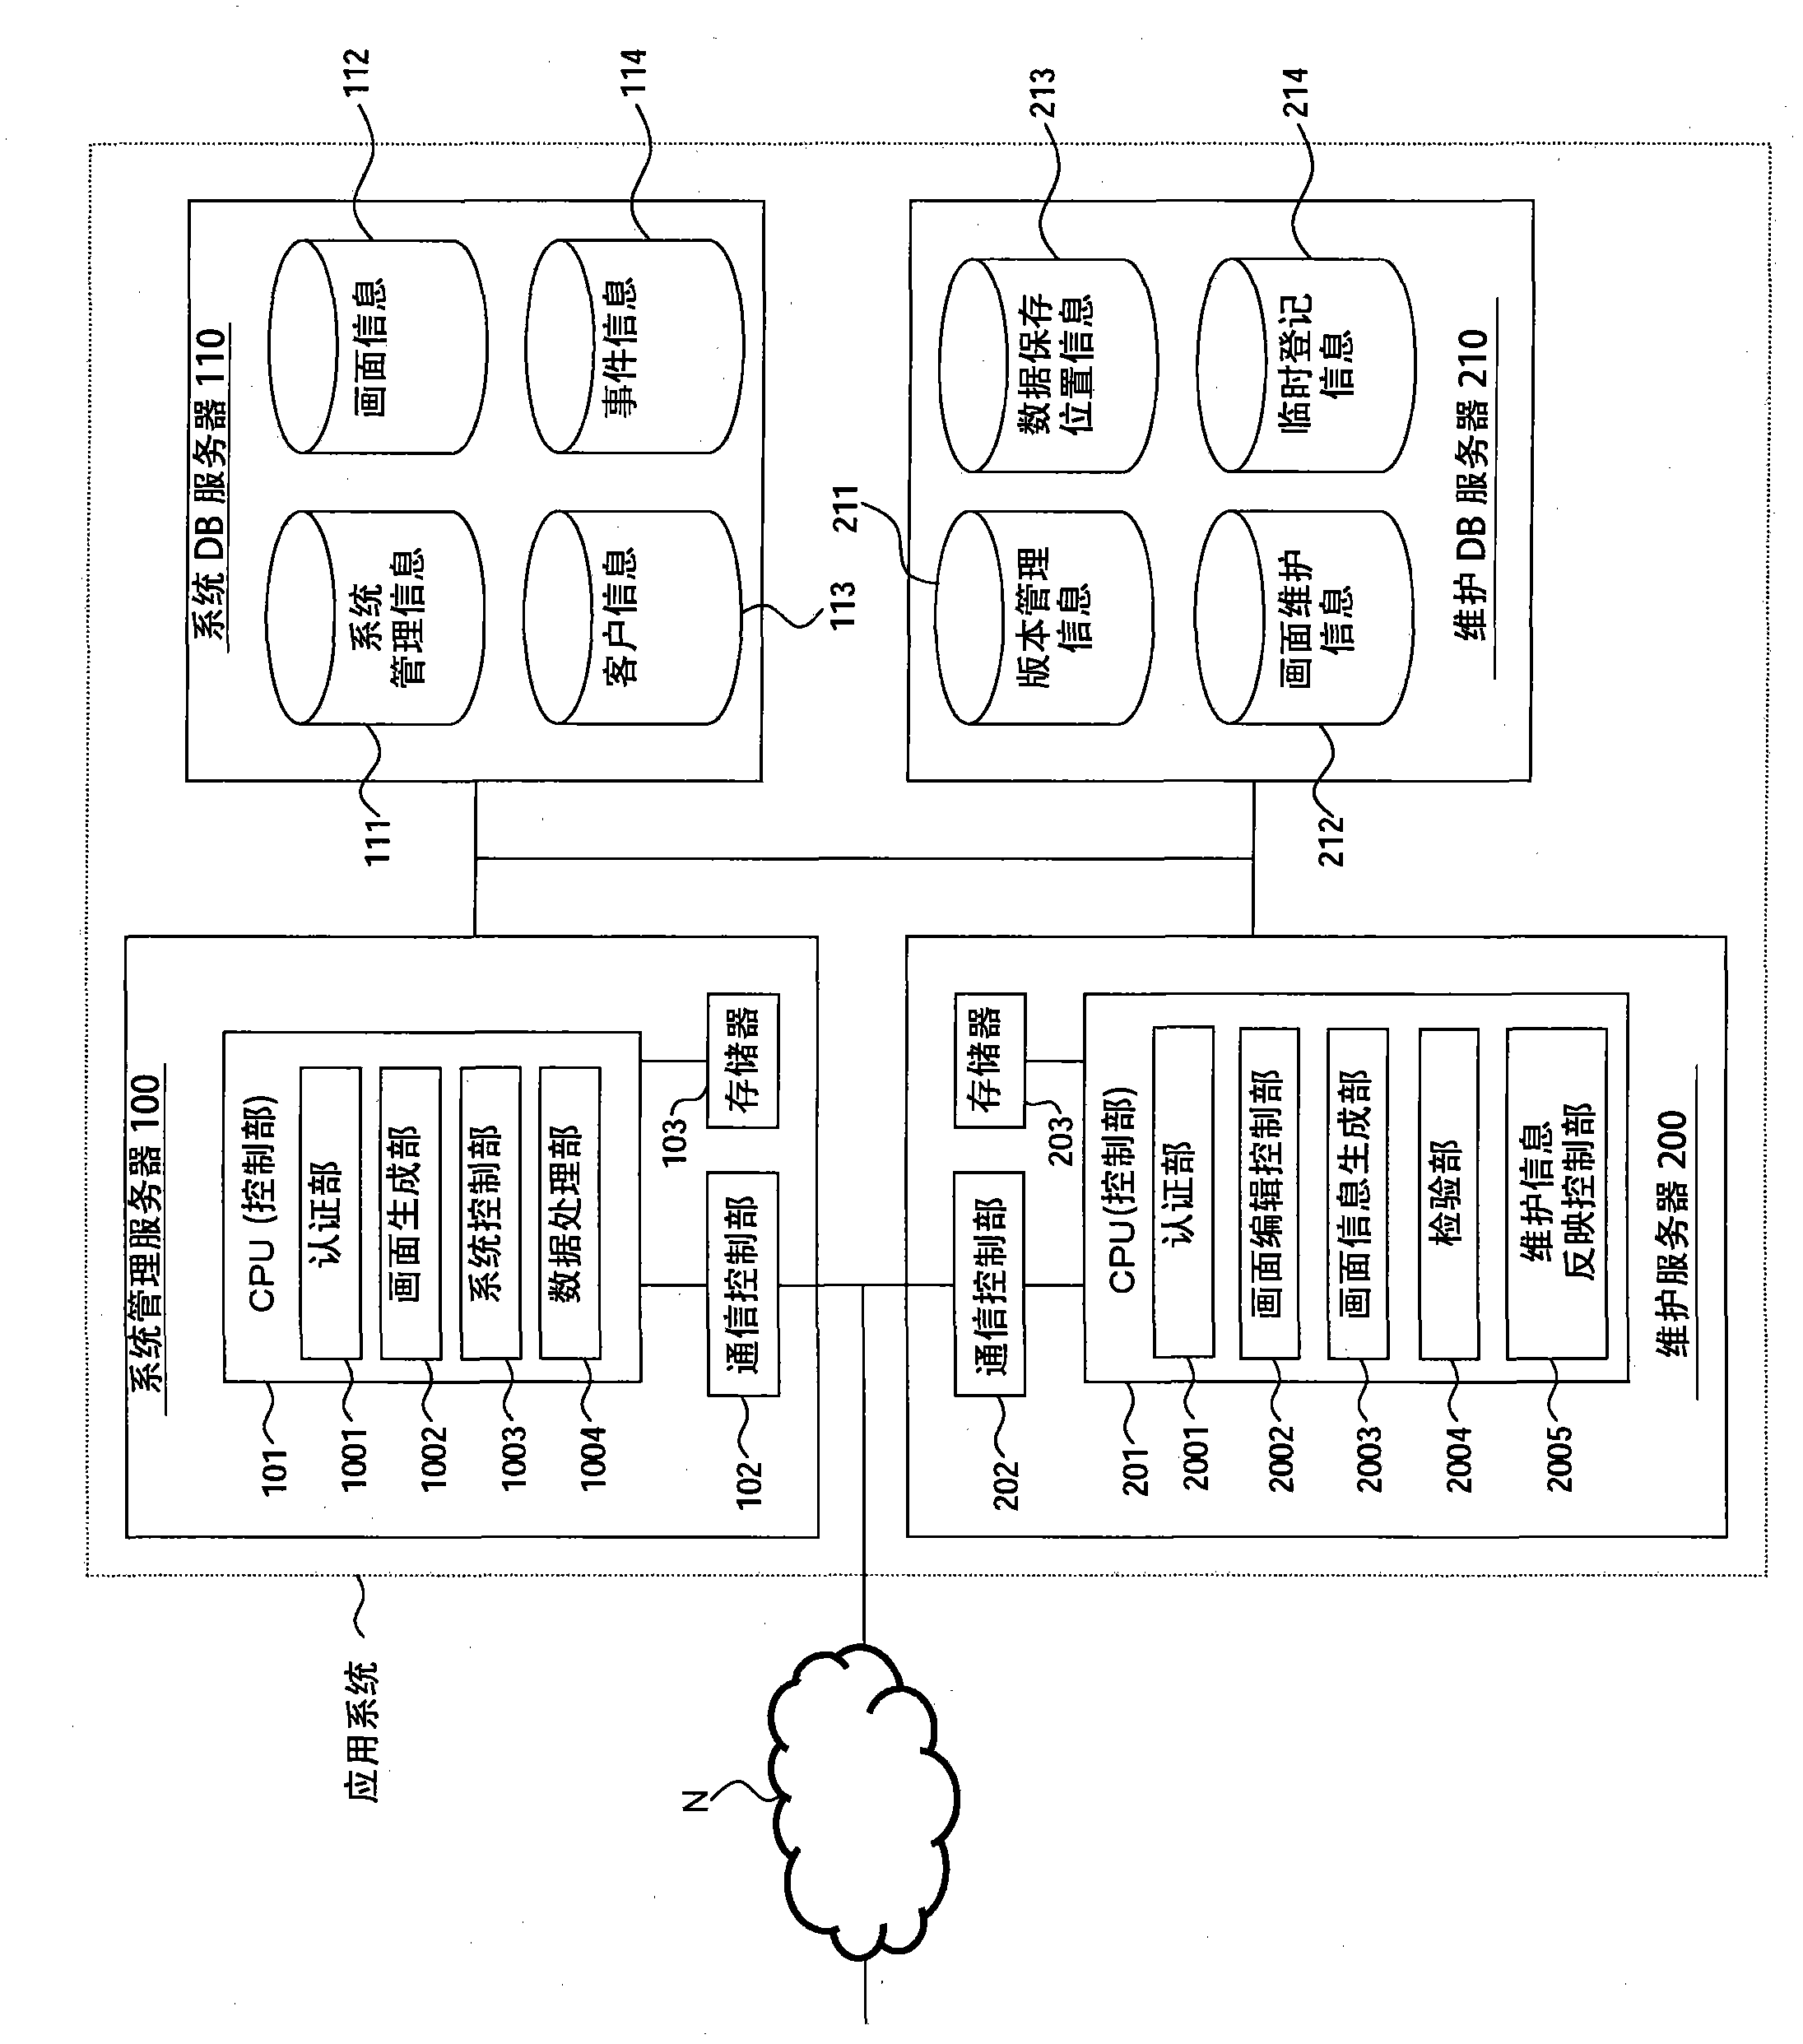 Maintenance device and application system